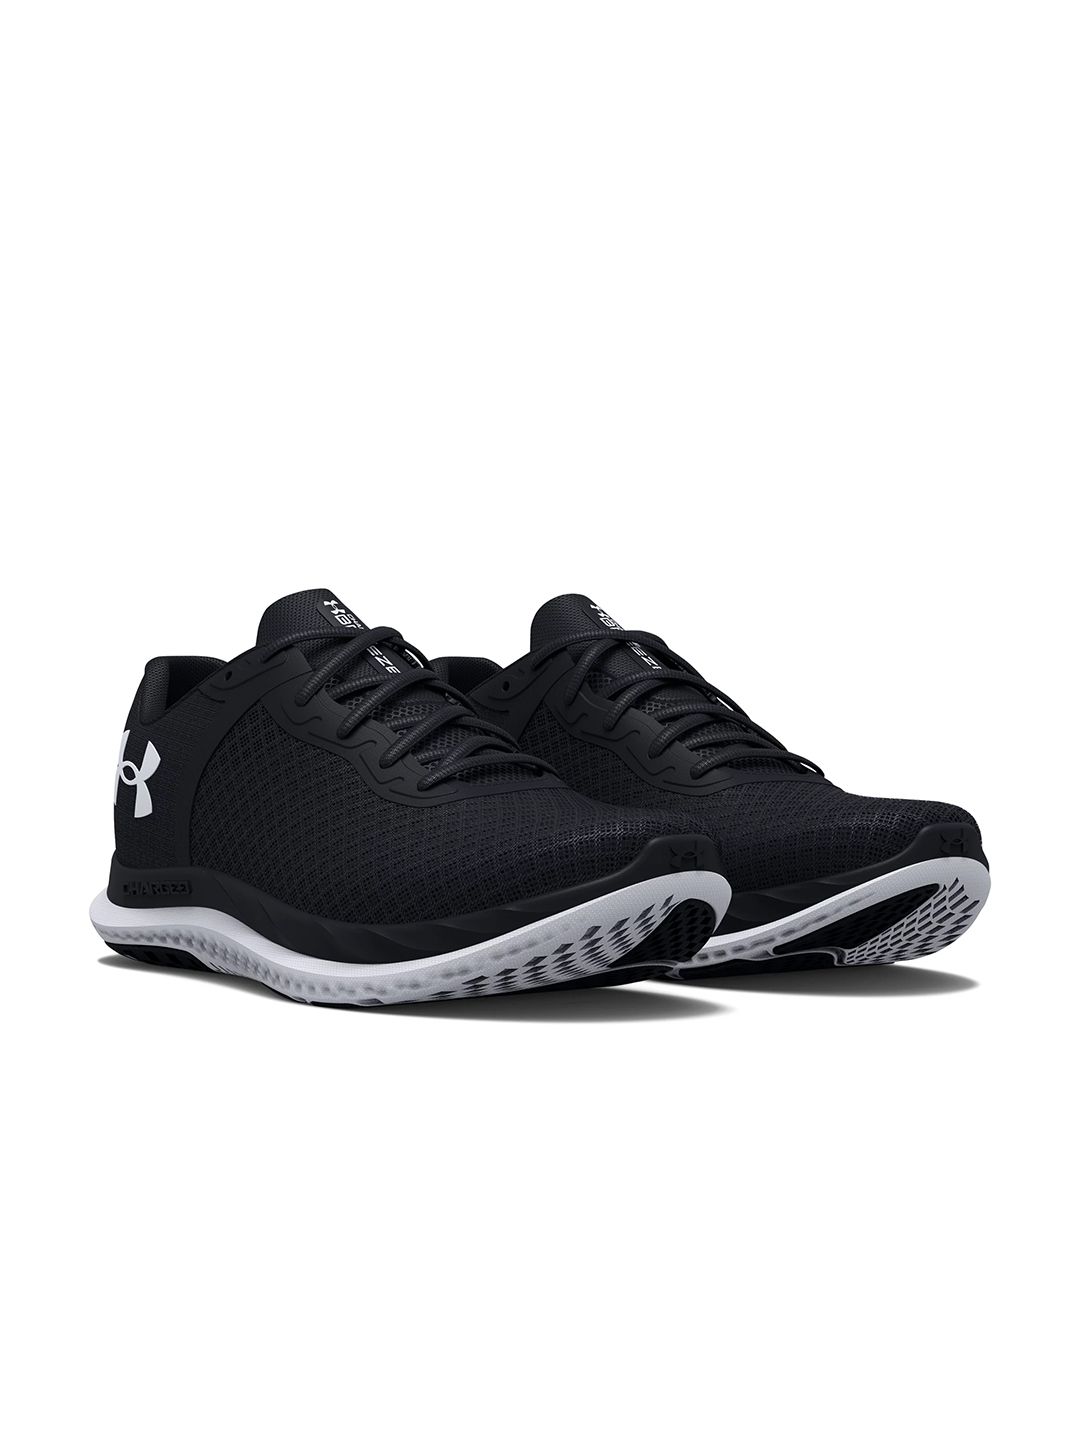 UNDER ARMOUR Women Black & White Woven Design Charged Breeze Running Shoes Price in India